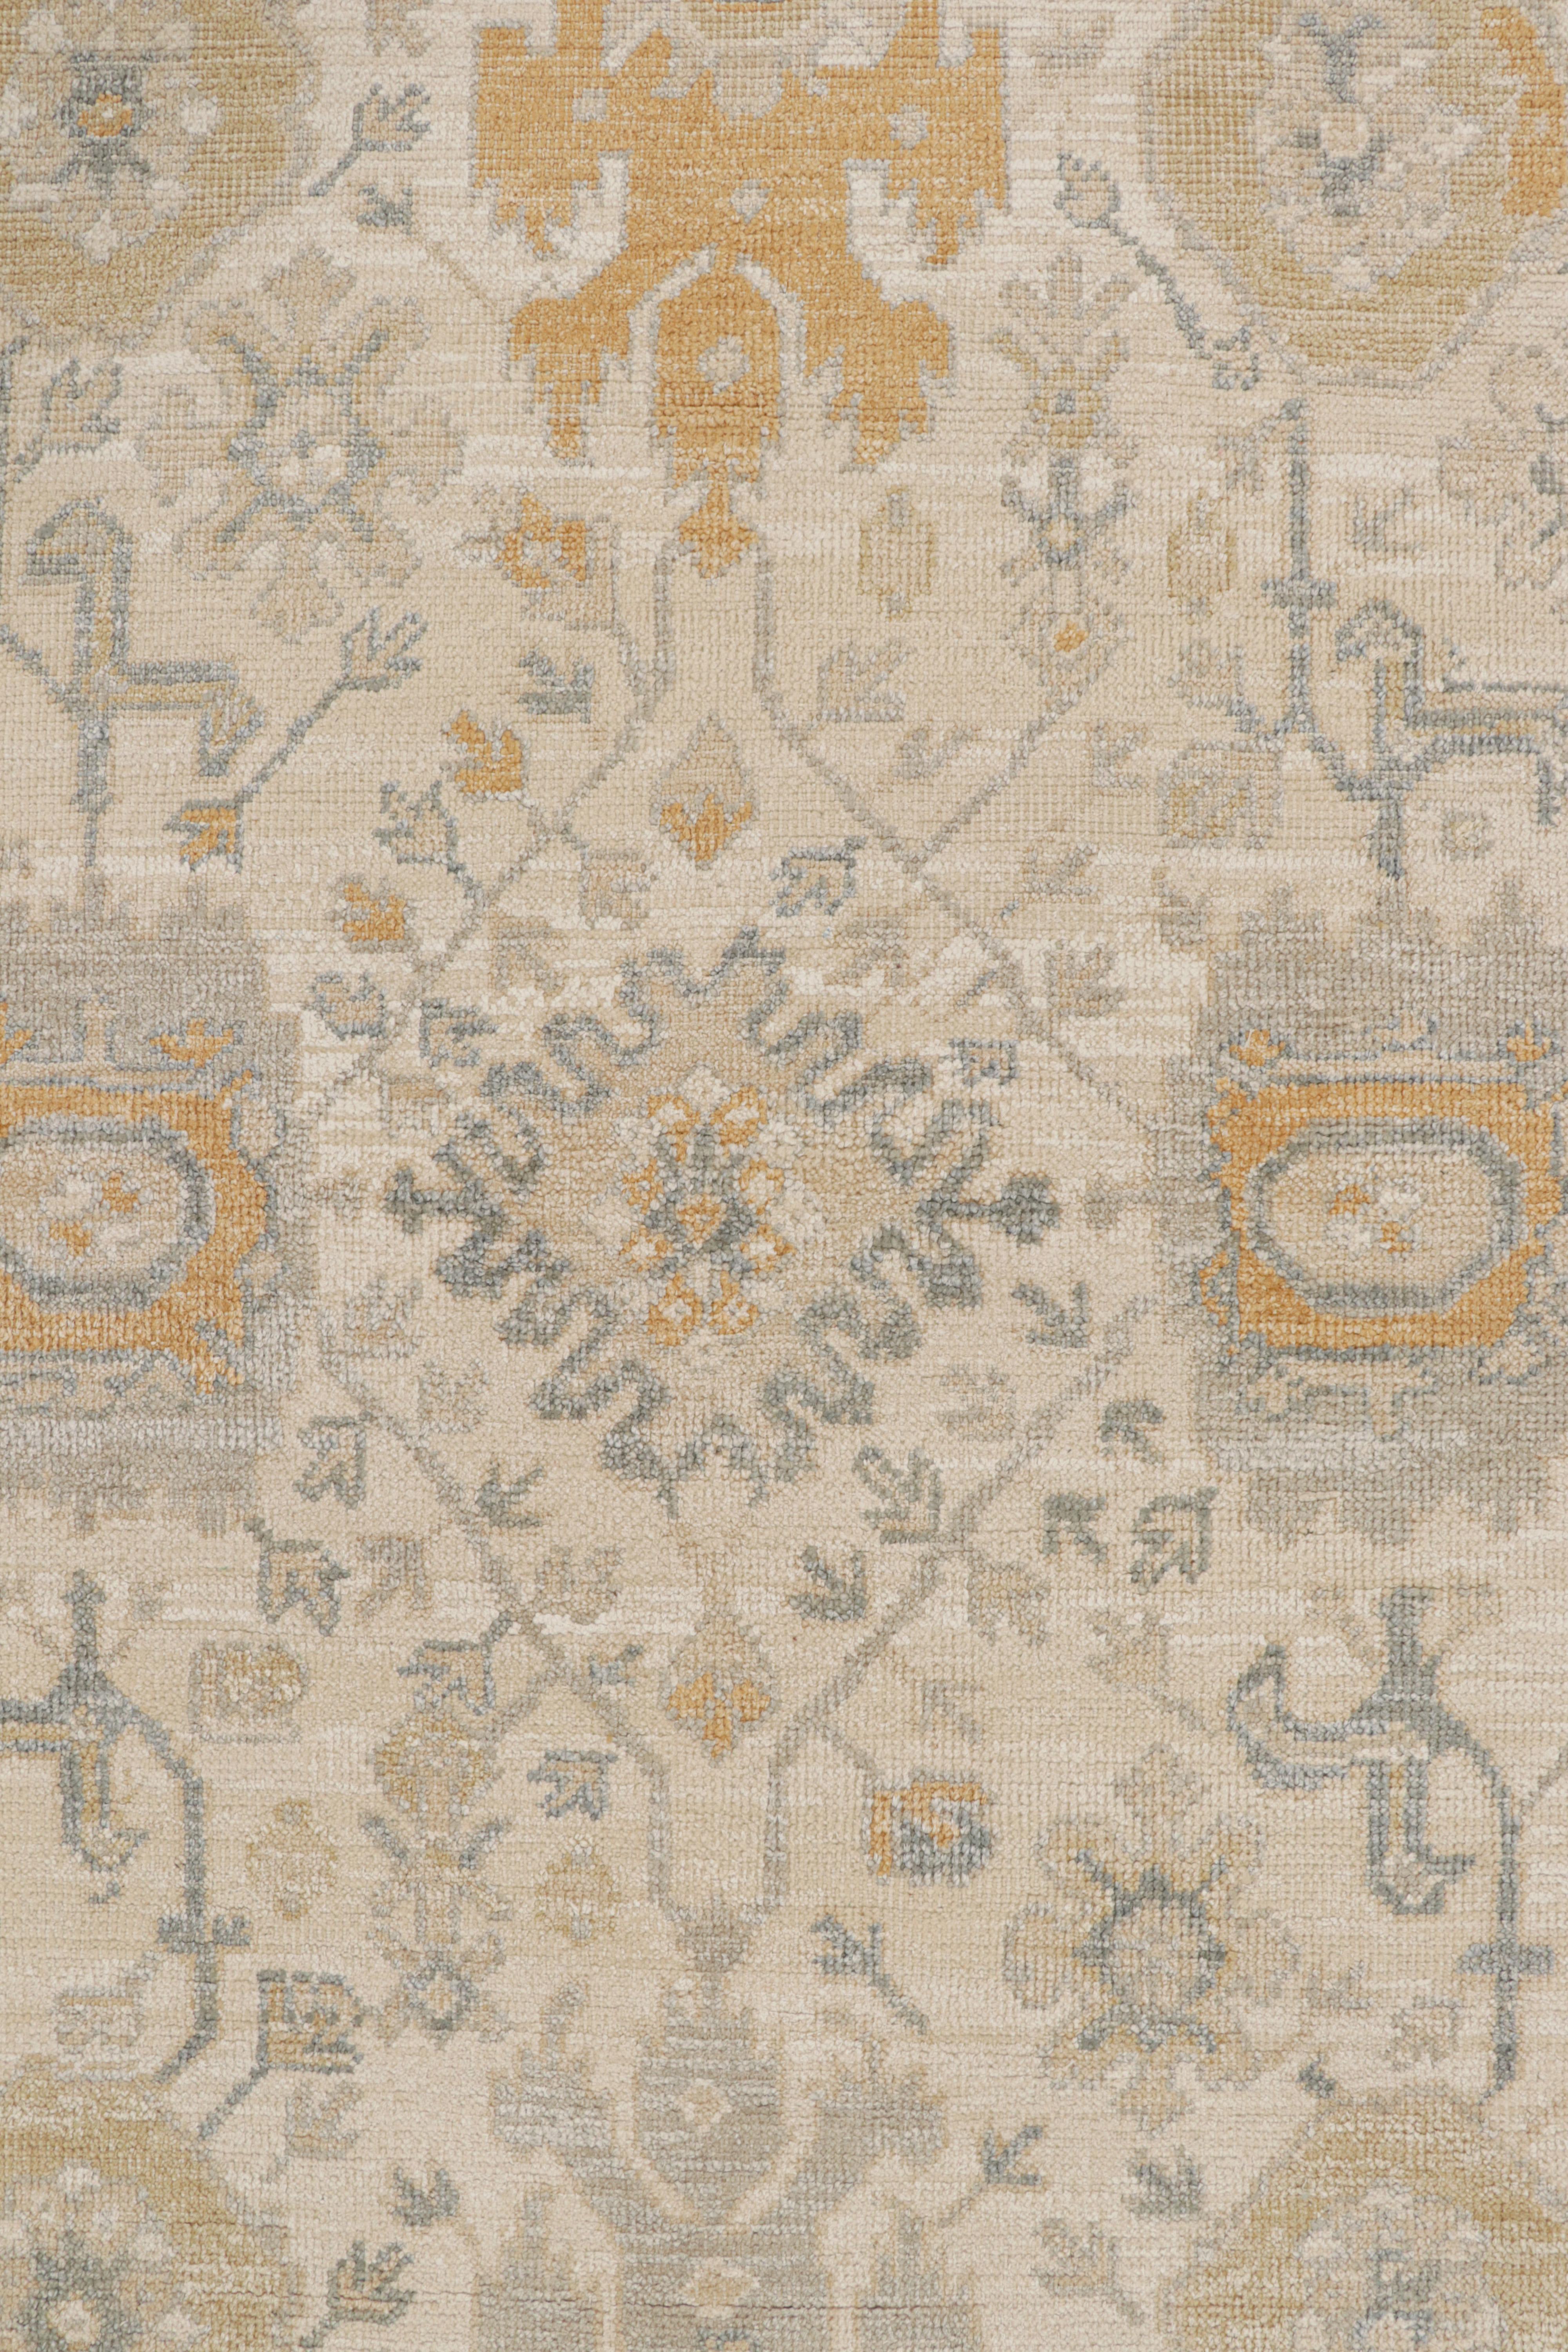 Contemporary Rug & Kilim’s Oushak Style Rug in Beige, Gold and Blue Floral Patterns For Sale